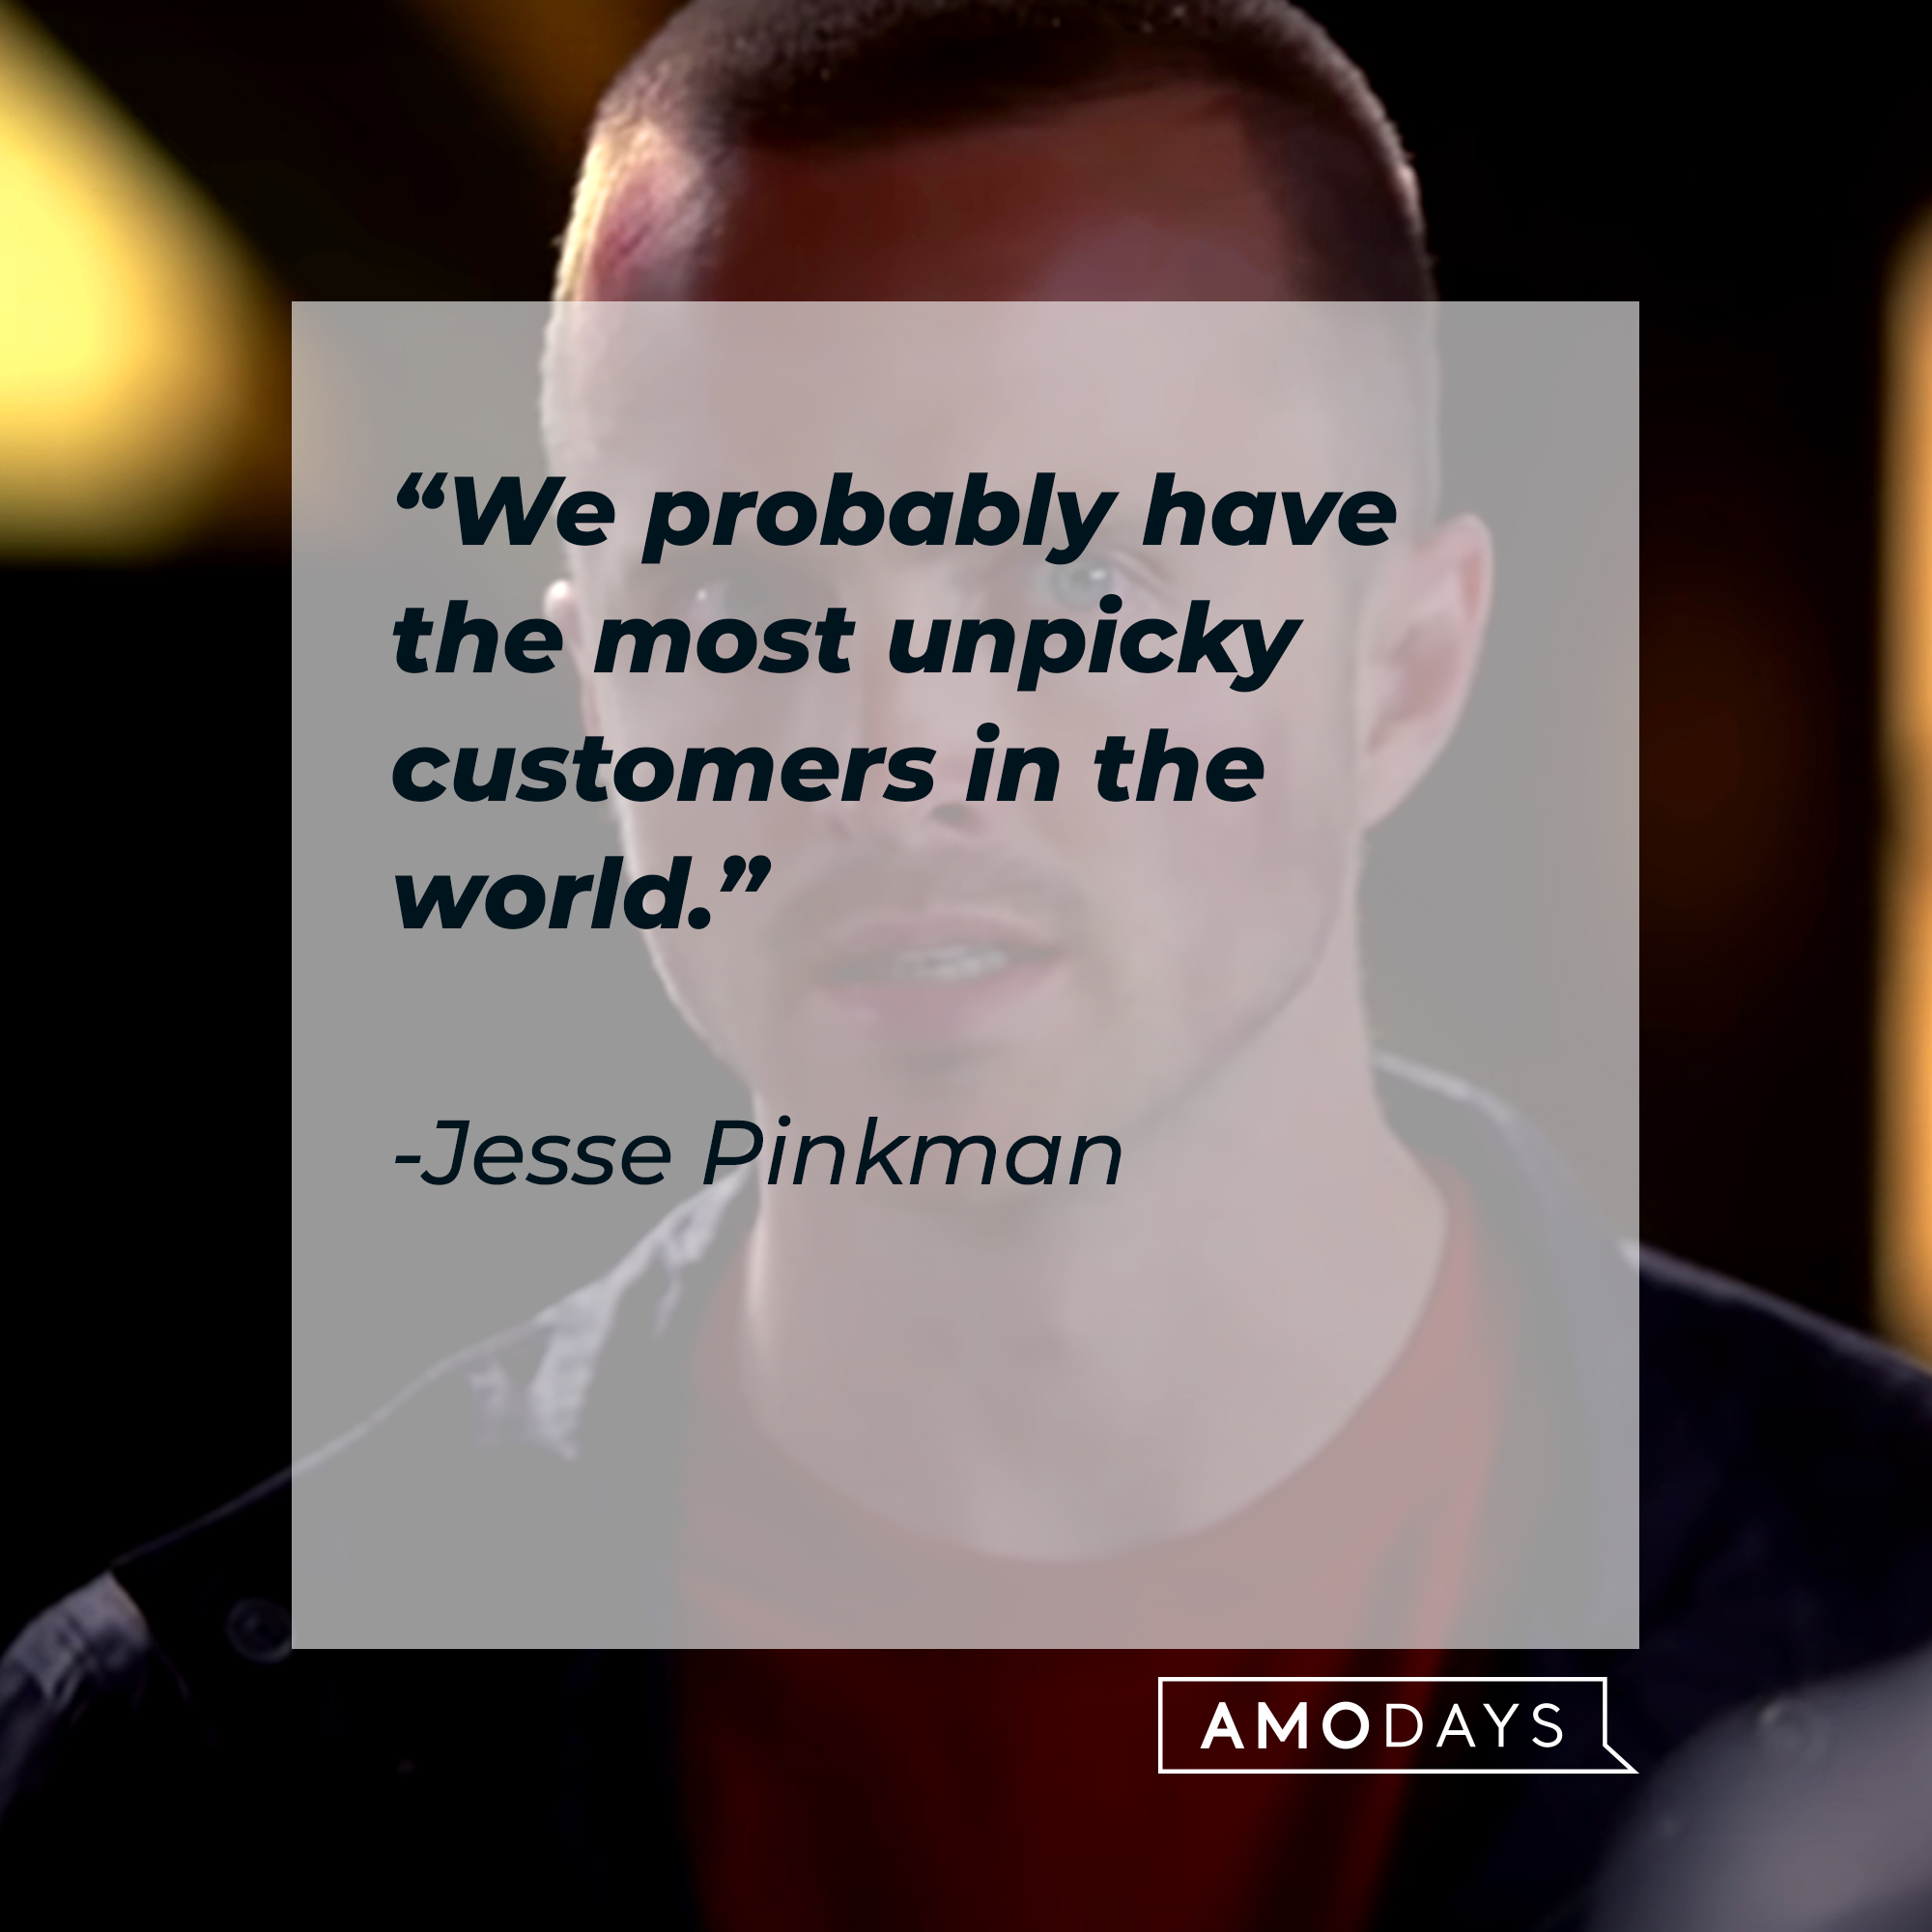 An image of Jesse Pinkman, with his quote: "We probably have the most unpicky customers in the world." | Source: Youtube.com/breakingbad